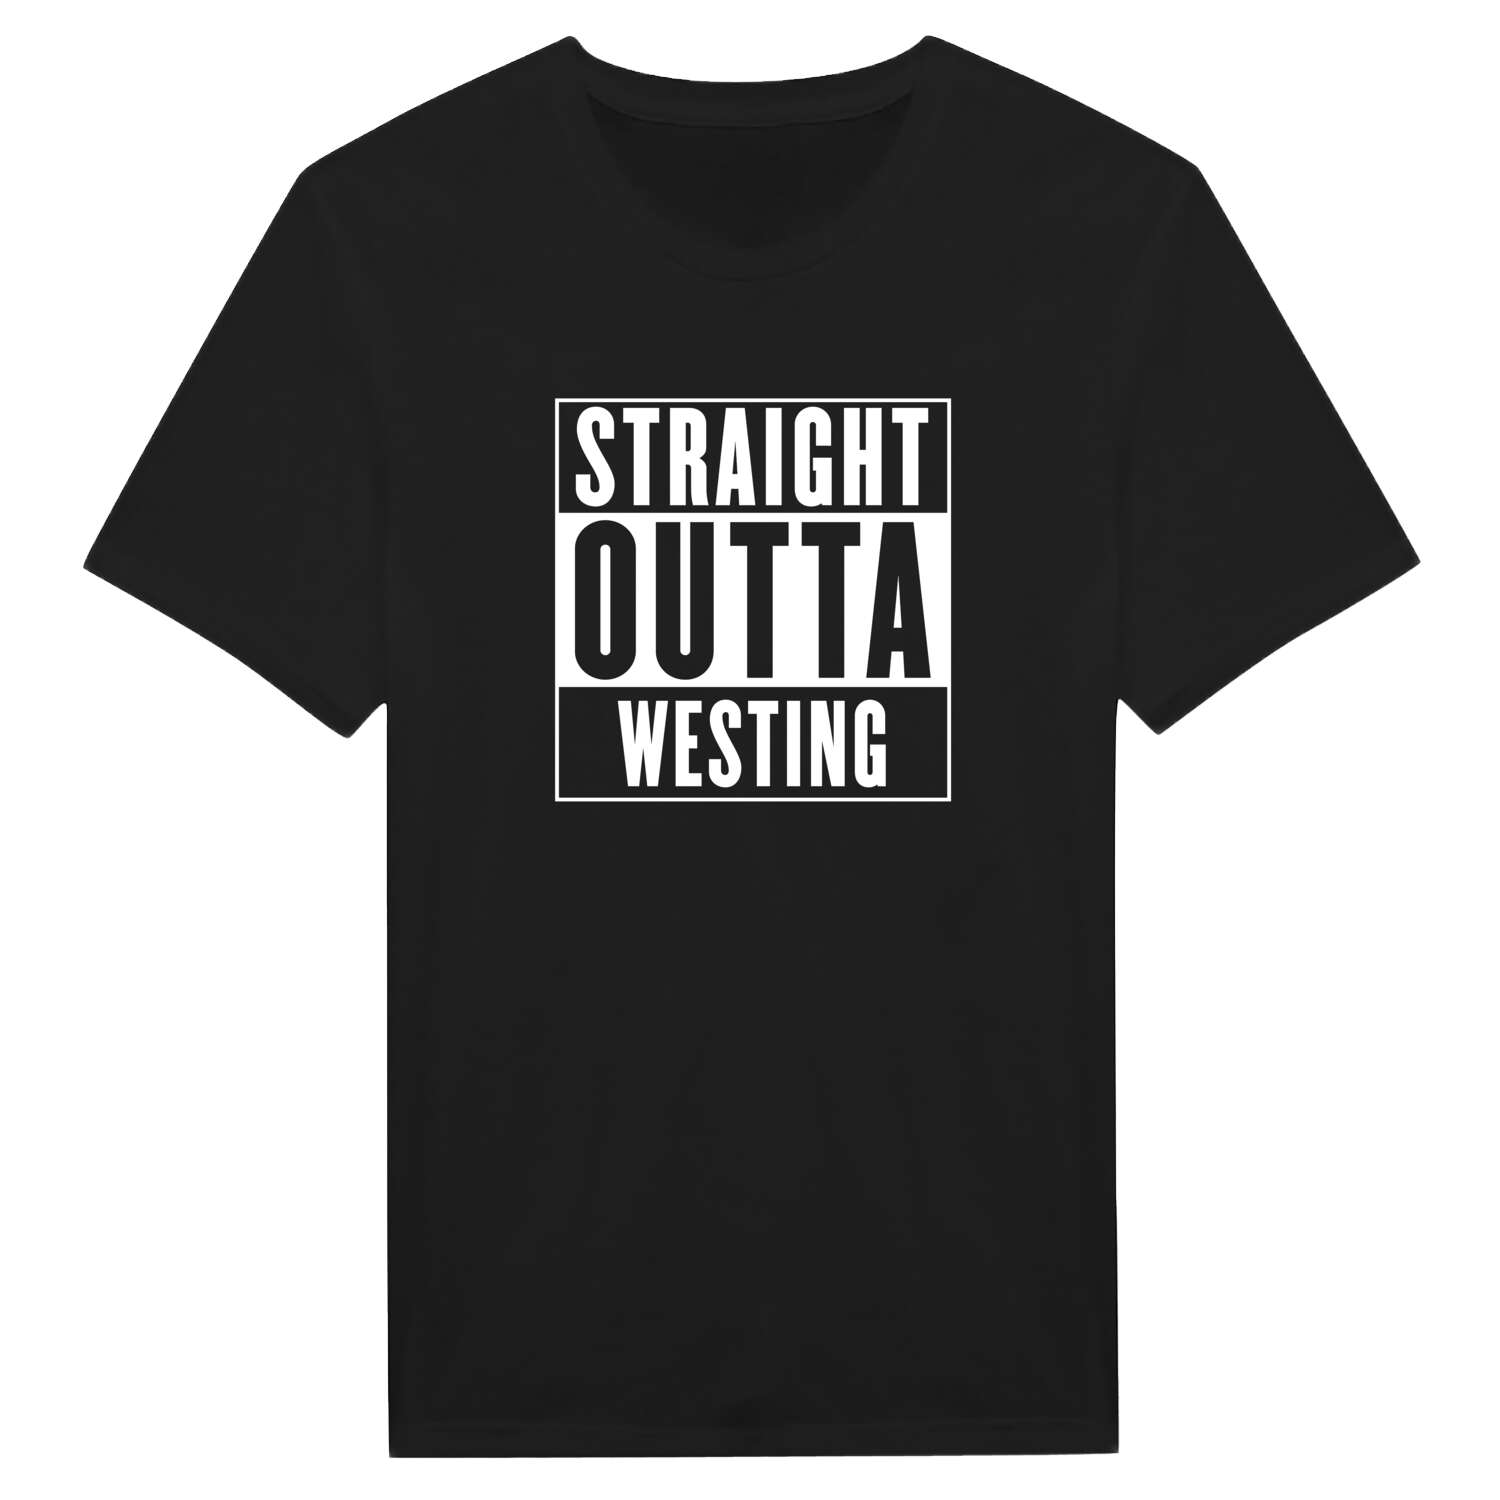 Westing T-Shirt »Straight Outta«